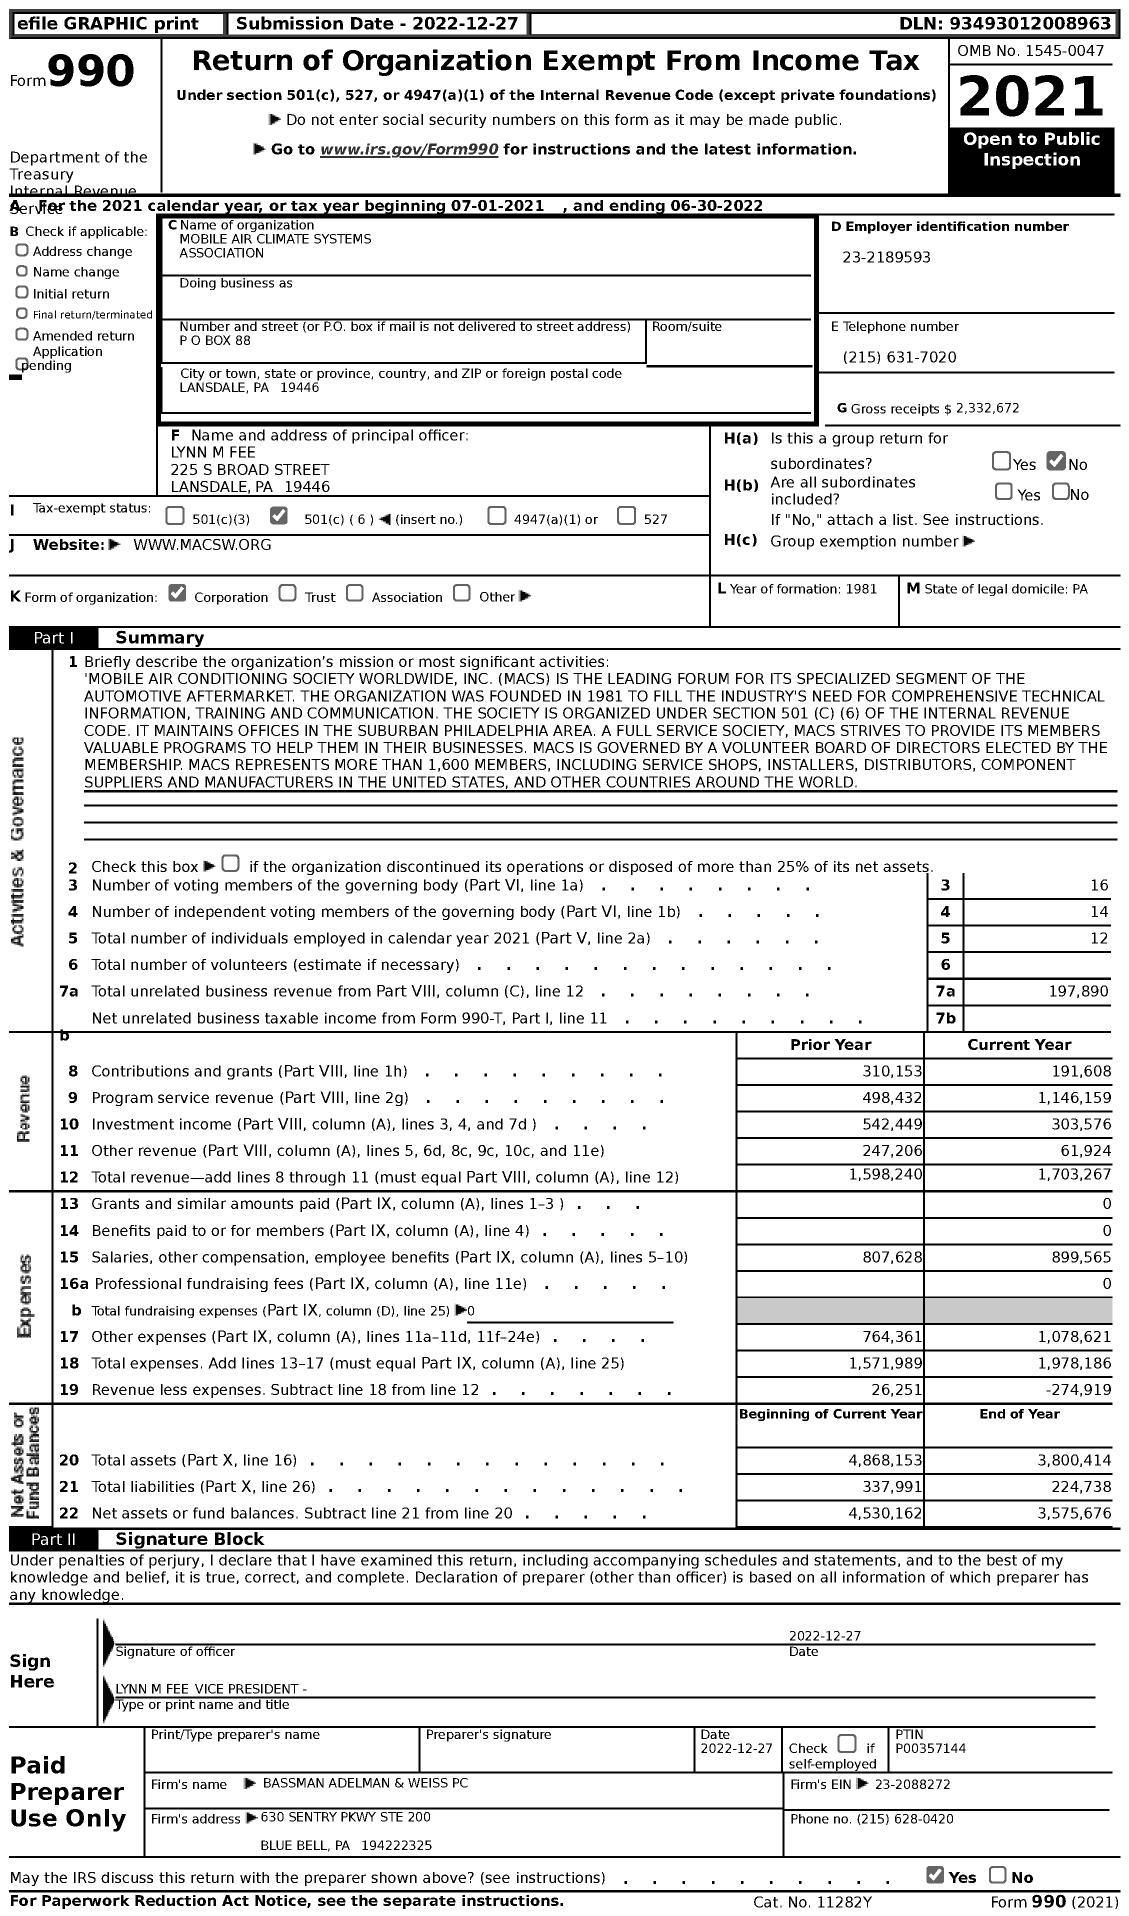 Image of first page of 2021 Form 990 for Mobile Air Climate Systems Association (MACS)